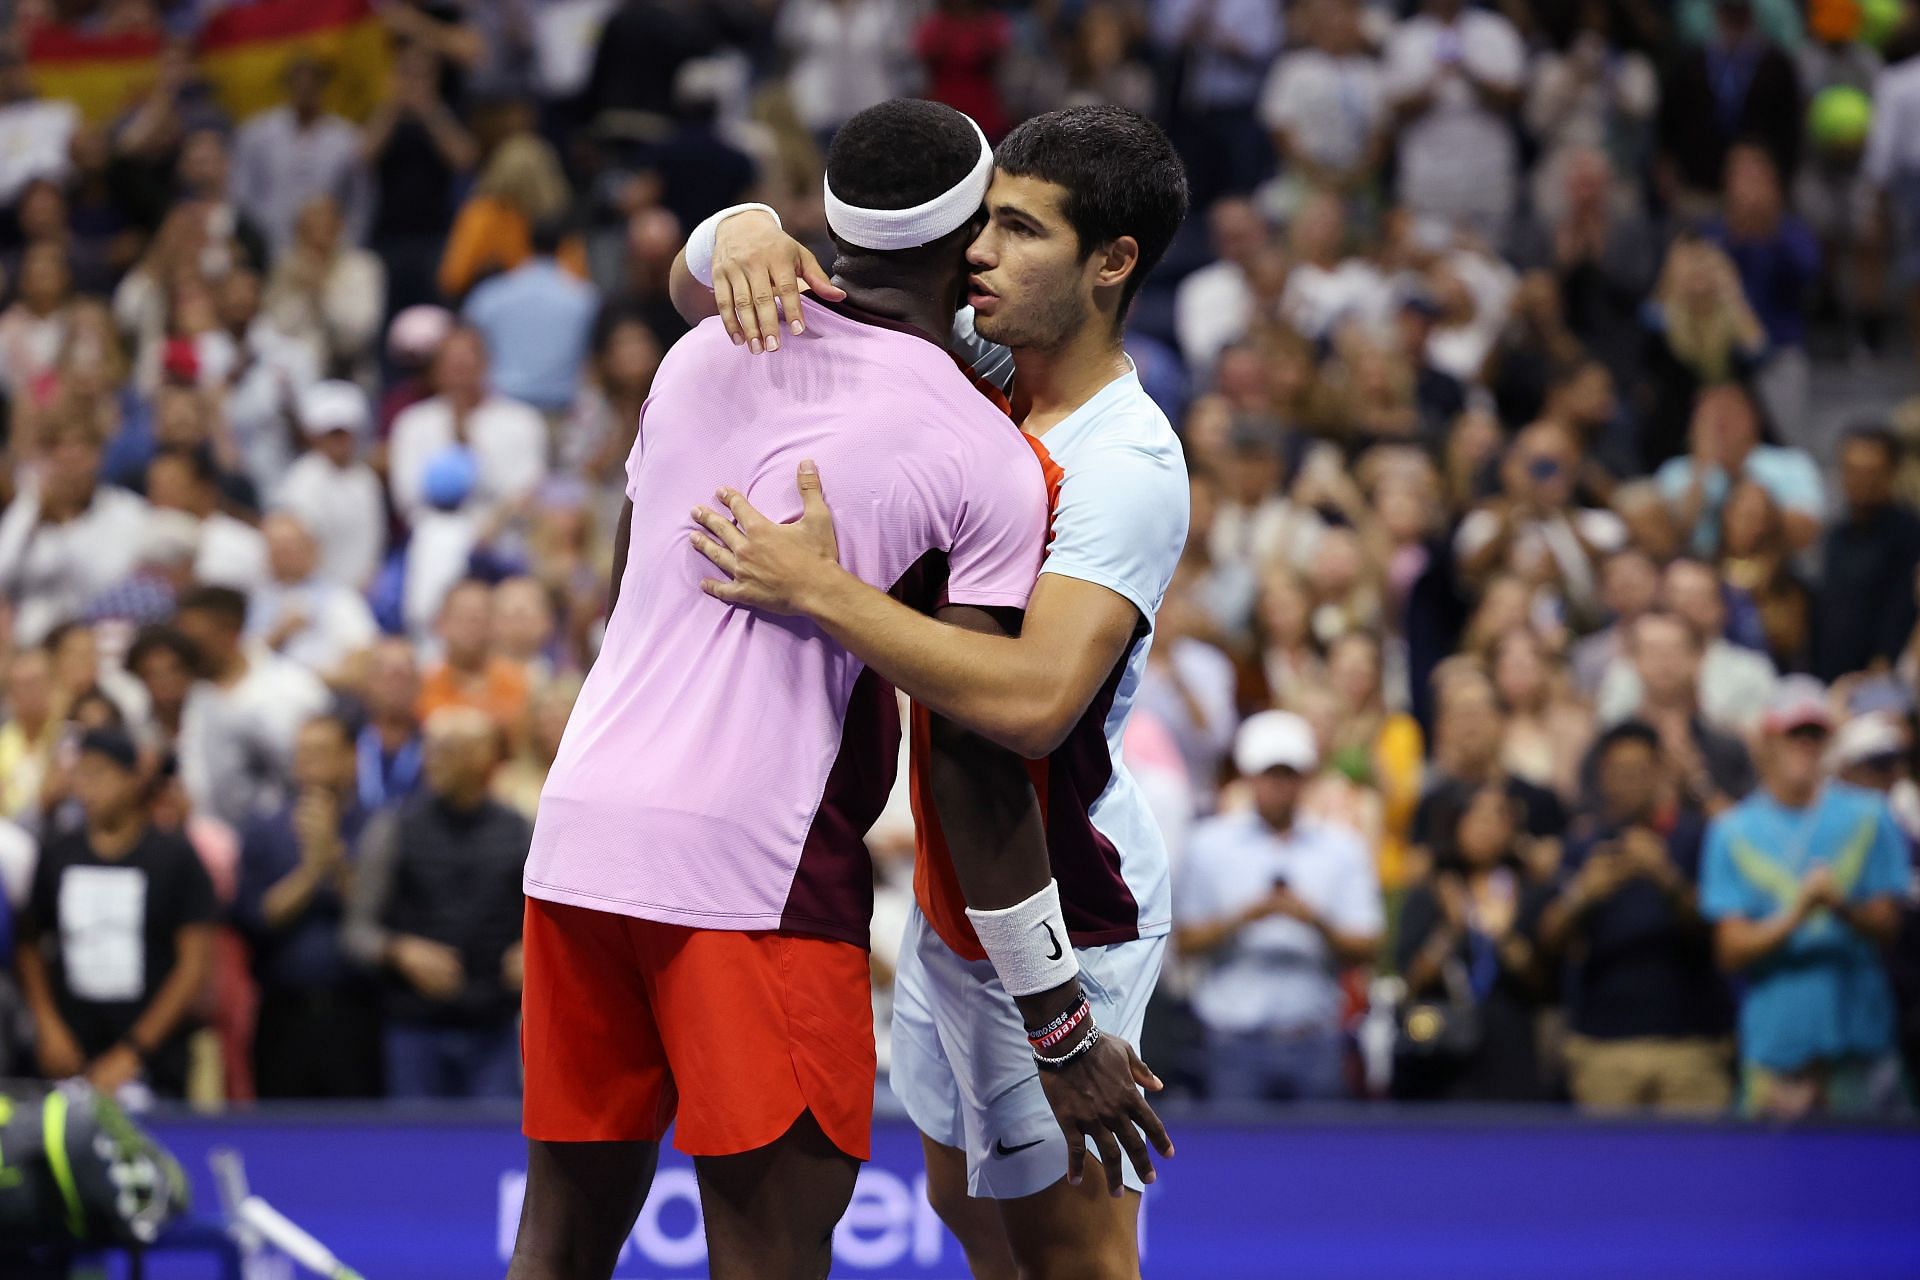 Frances Tiafoe and Carlos Alcaraz pictured hugging at the 2022 US Open.